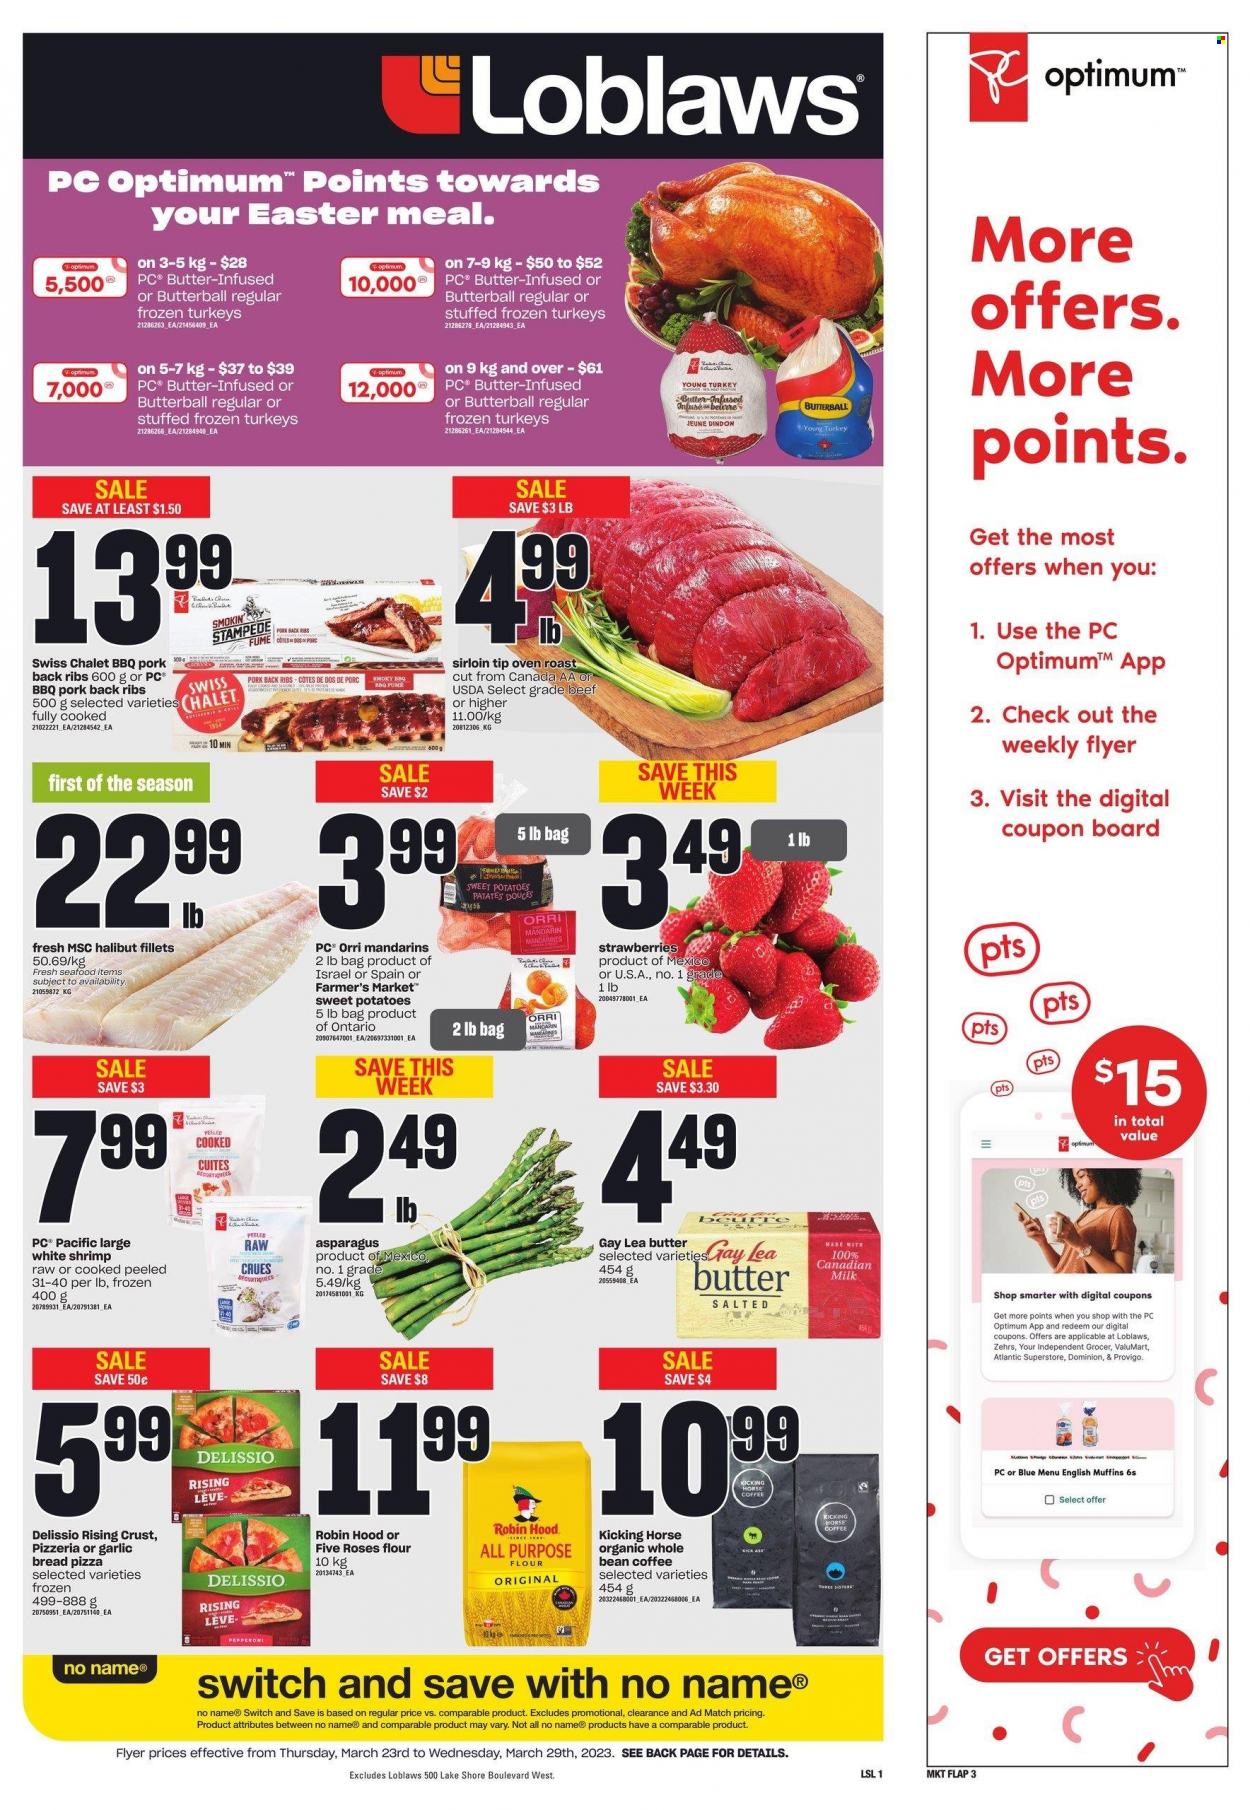 thumbnail - Loblaws Flyer - March 23, 2023 - March 29, 2023 - Sales products - bread, english muffins, asparagus, sweet potato, potatoes, mandarines, strawberries, halibut, seafood, shrimps, No Name, pizza, roast, Butterball, milk, flour, coffee, turkey, ribs, pork meat, pork ribs, pork back ribs, Optimum. Page 1.